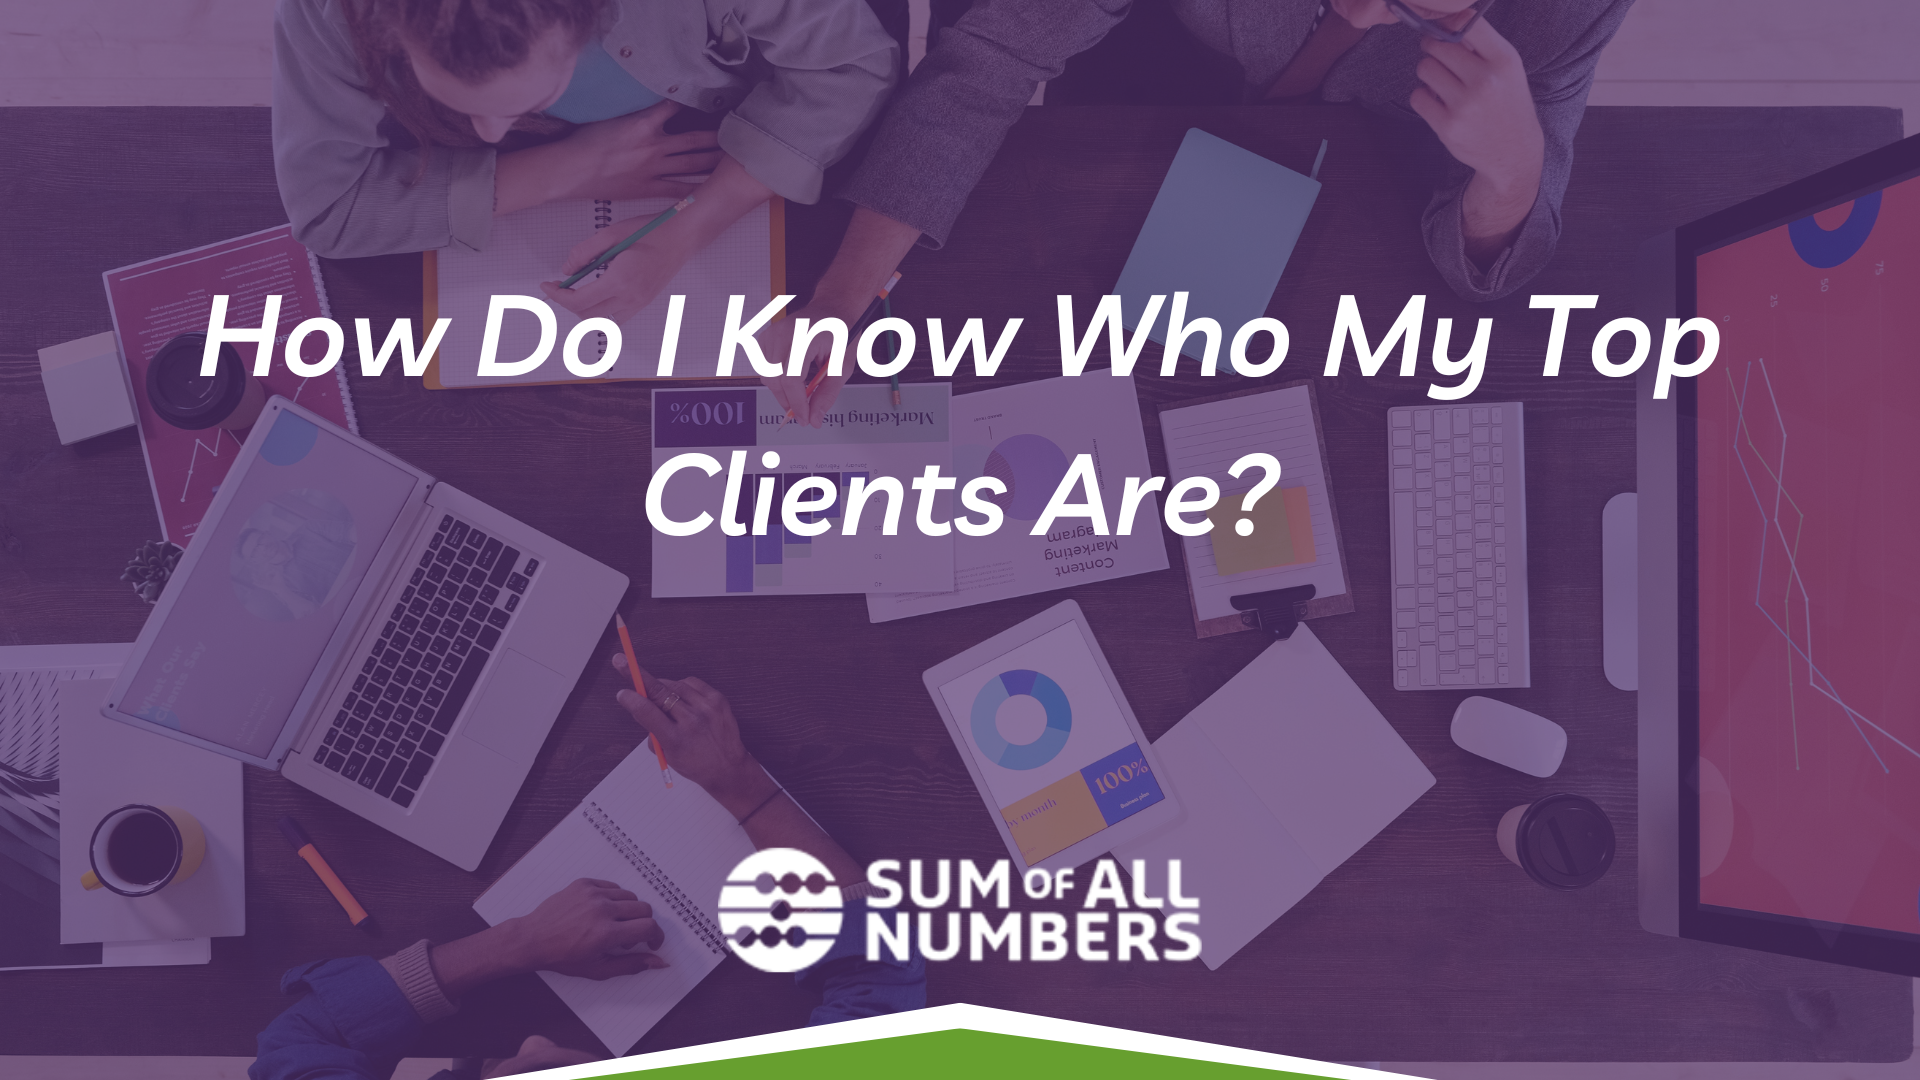 How do I know who my top clients are